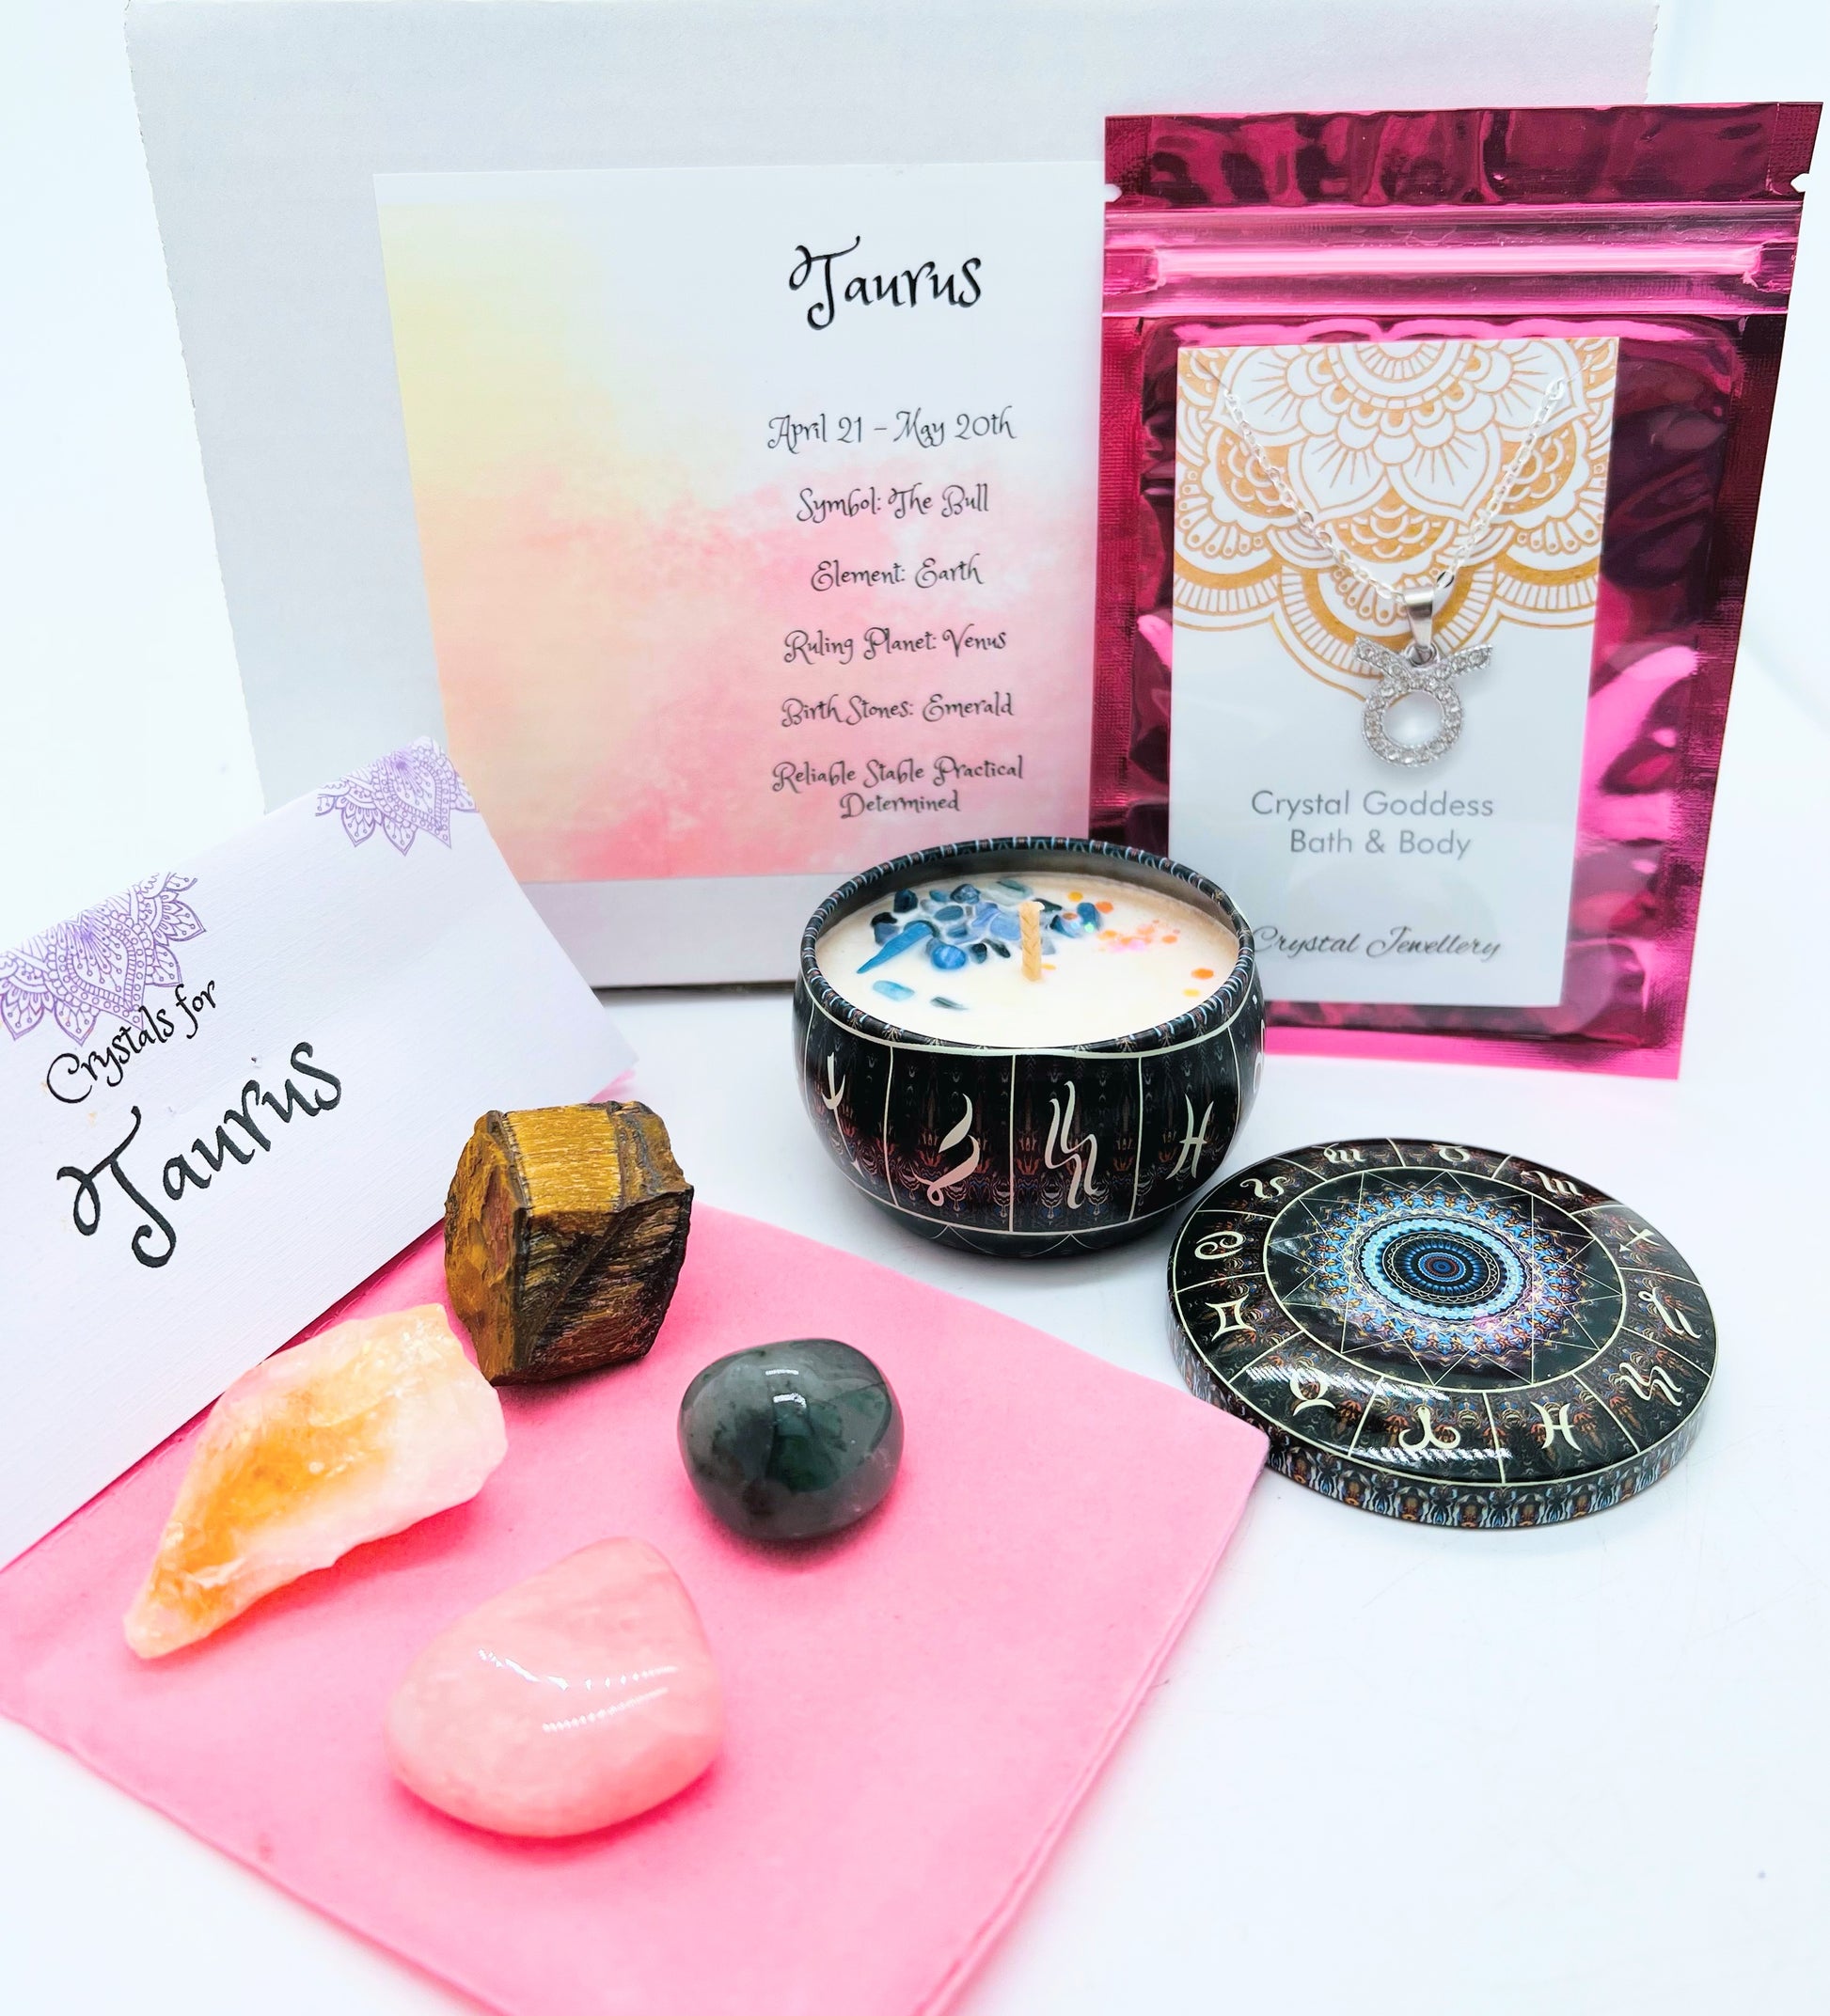 Virgo Zodiac gift box showing crystals for this sign and pendant necklace and crystal set.